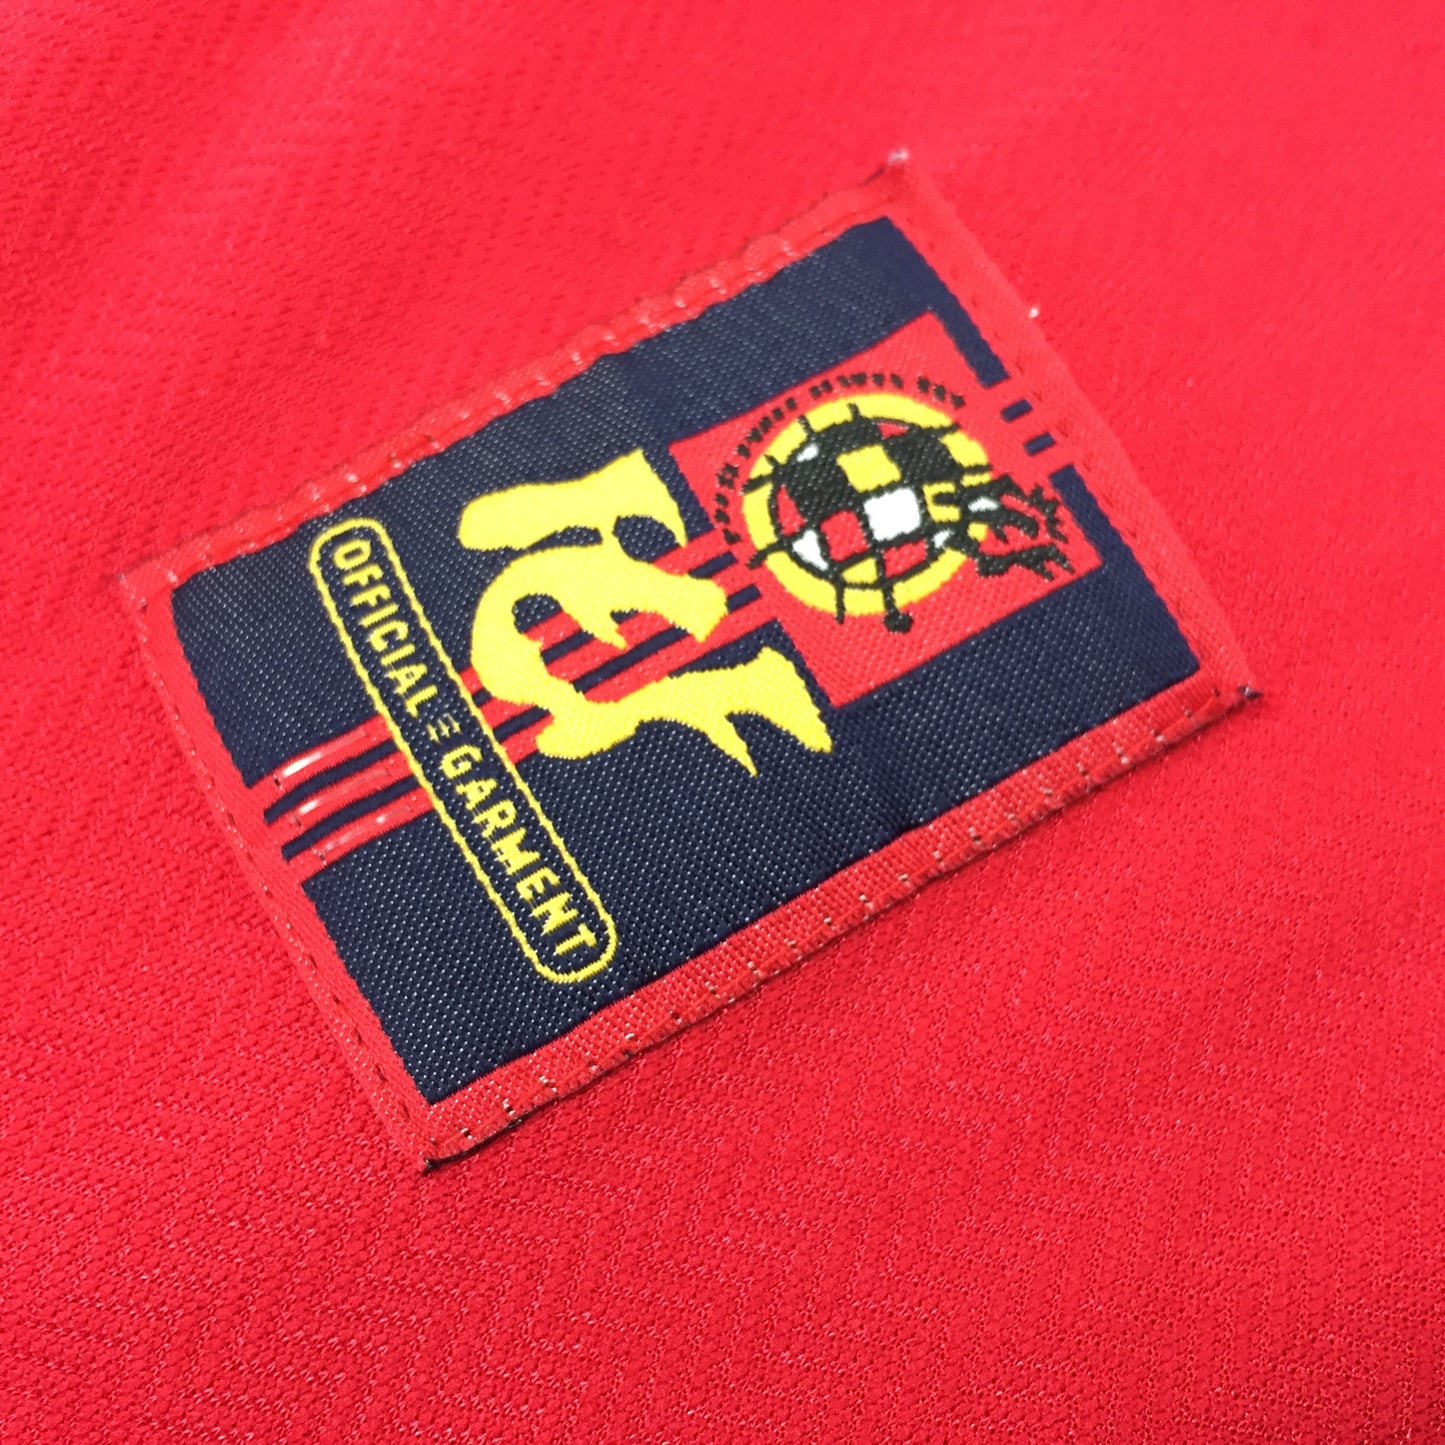 0501 Adidas Vintage Spain National Soccer Team Jersey 1998 Home